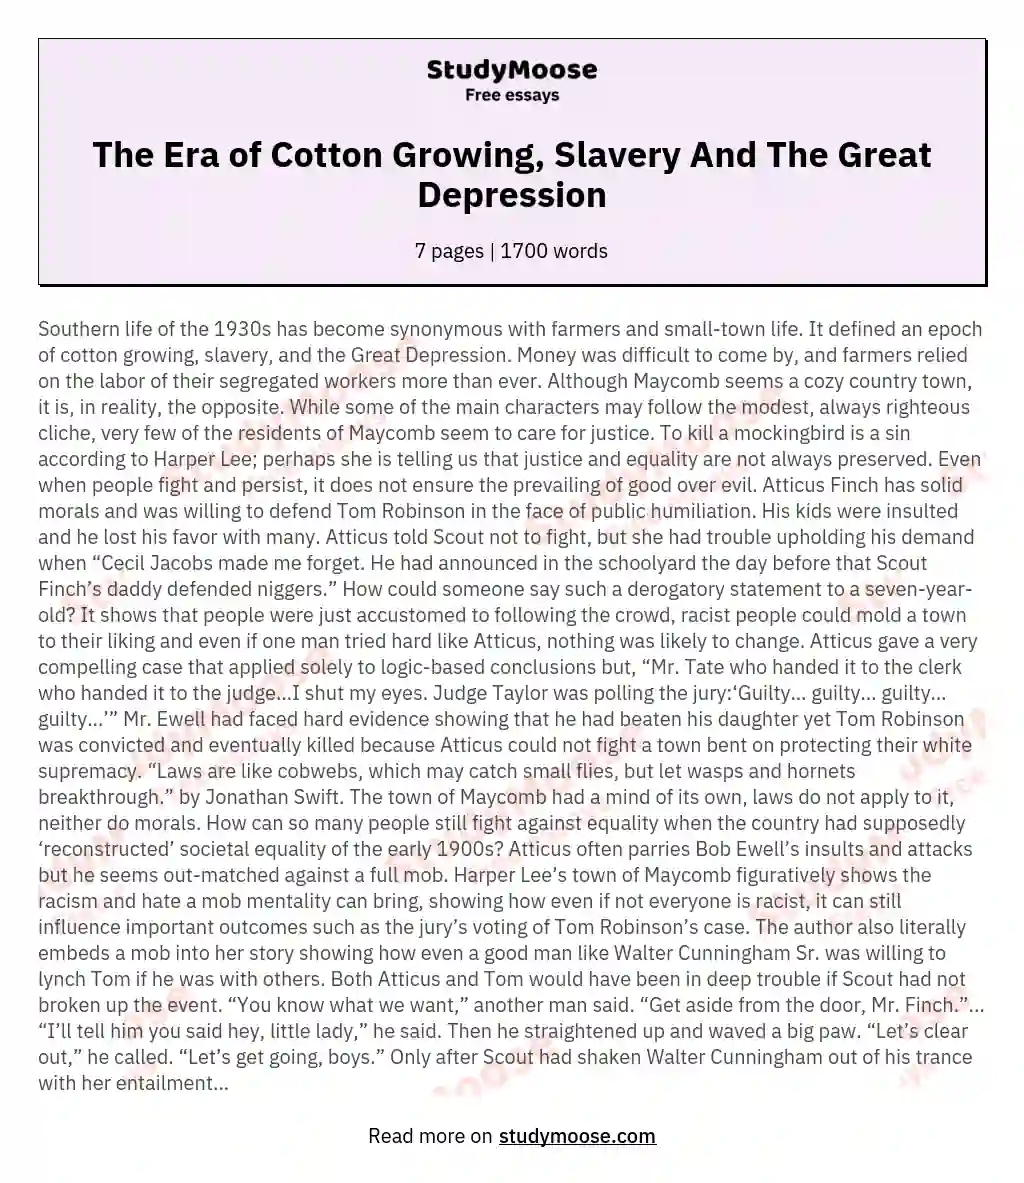 The Era of Cotton Growing, Slavery And The Great Depression essay